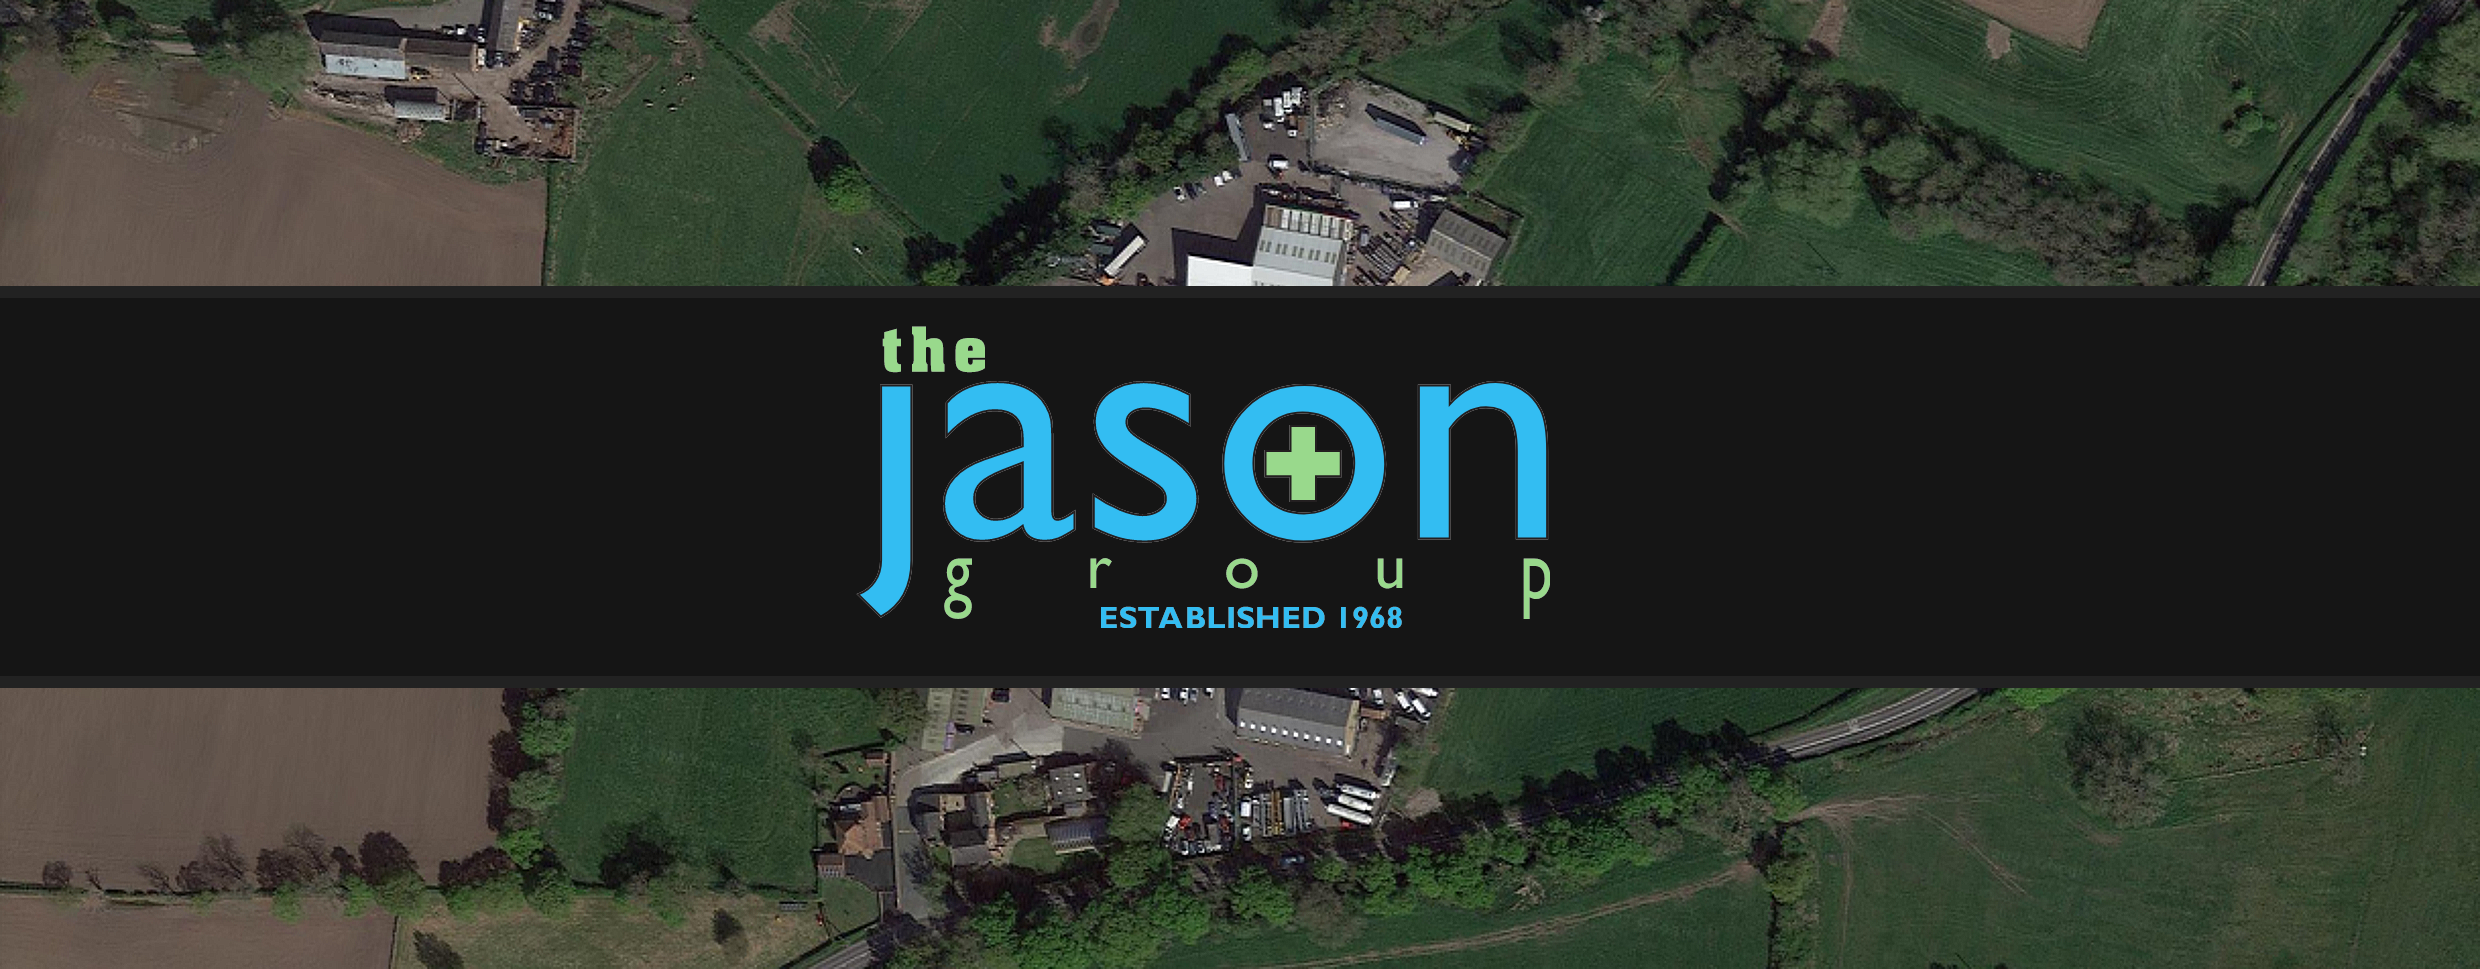 The Jason Group's head office and manufacturing site in Middlewich, Cheshire.